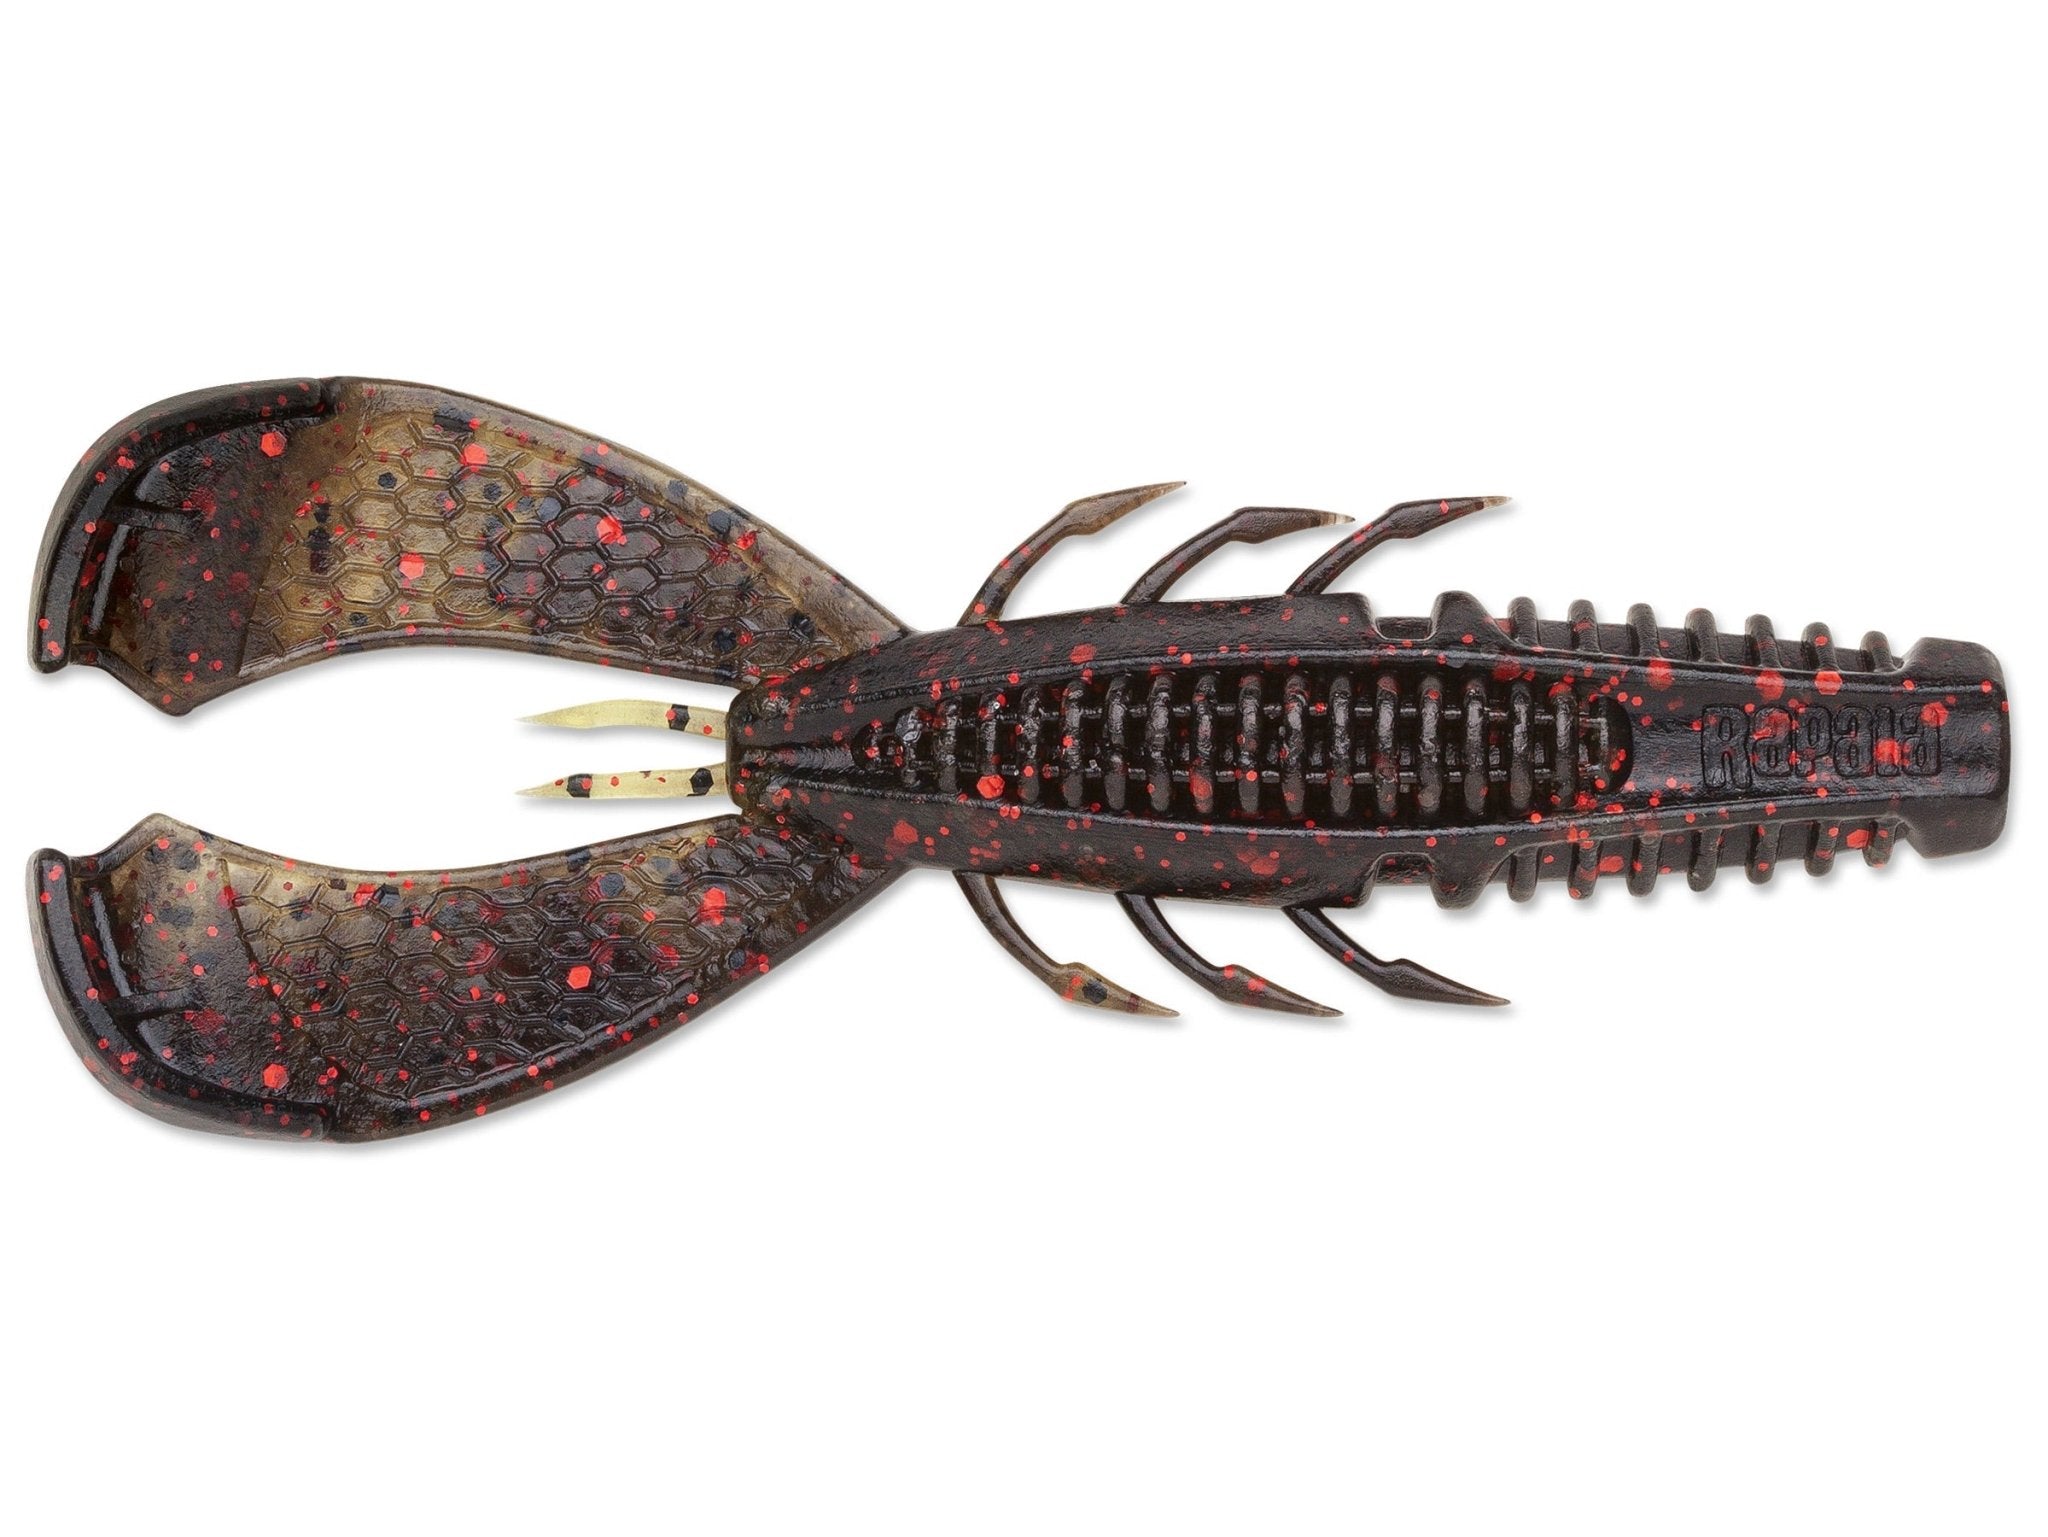 Rapala CrushCity Cleanup Craw - Hamilton Bait and Tackle